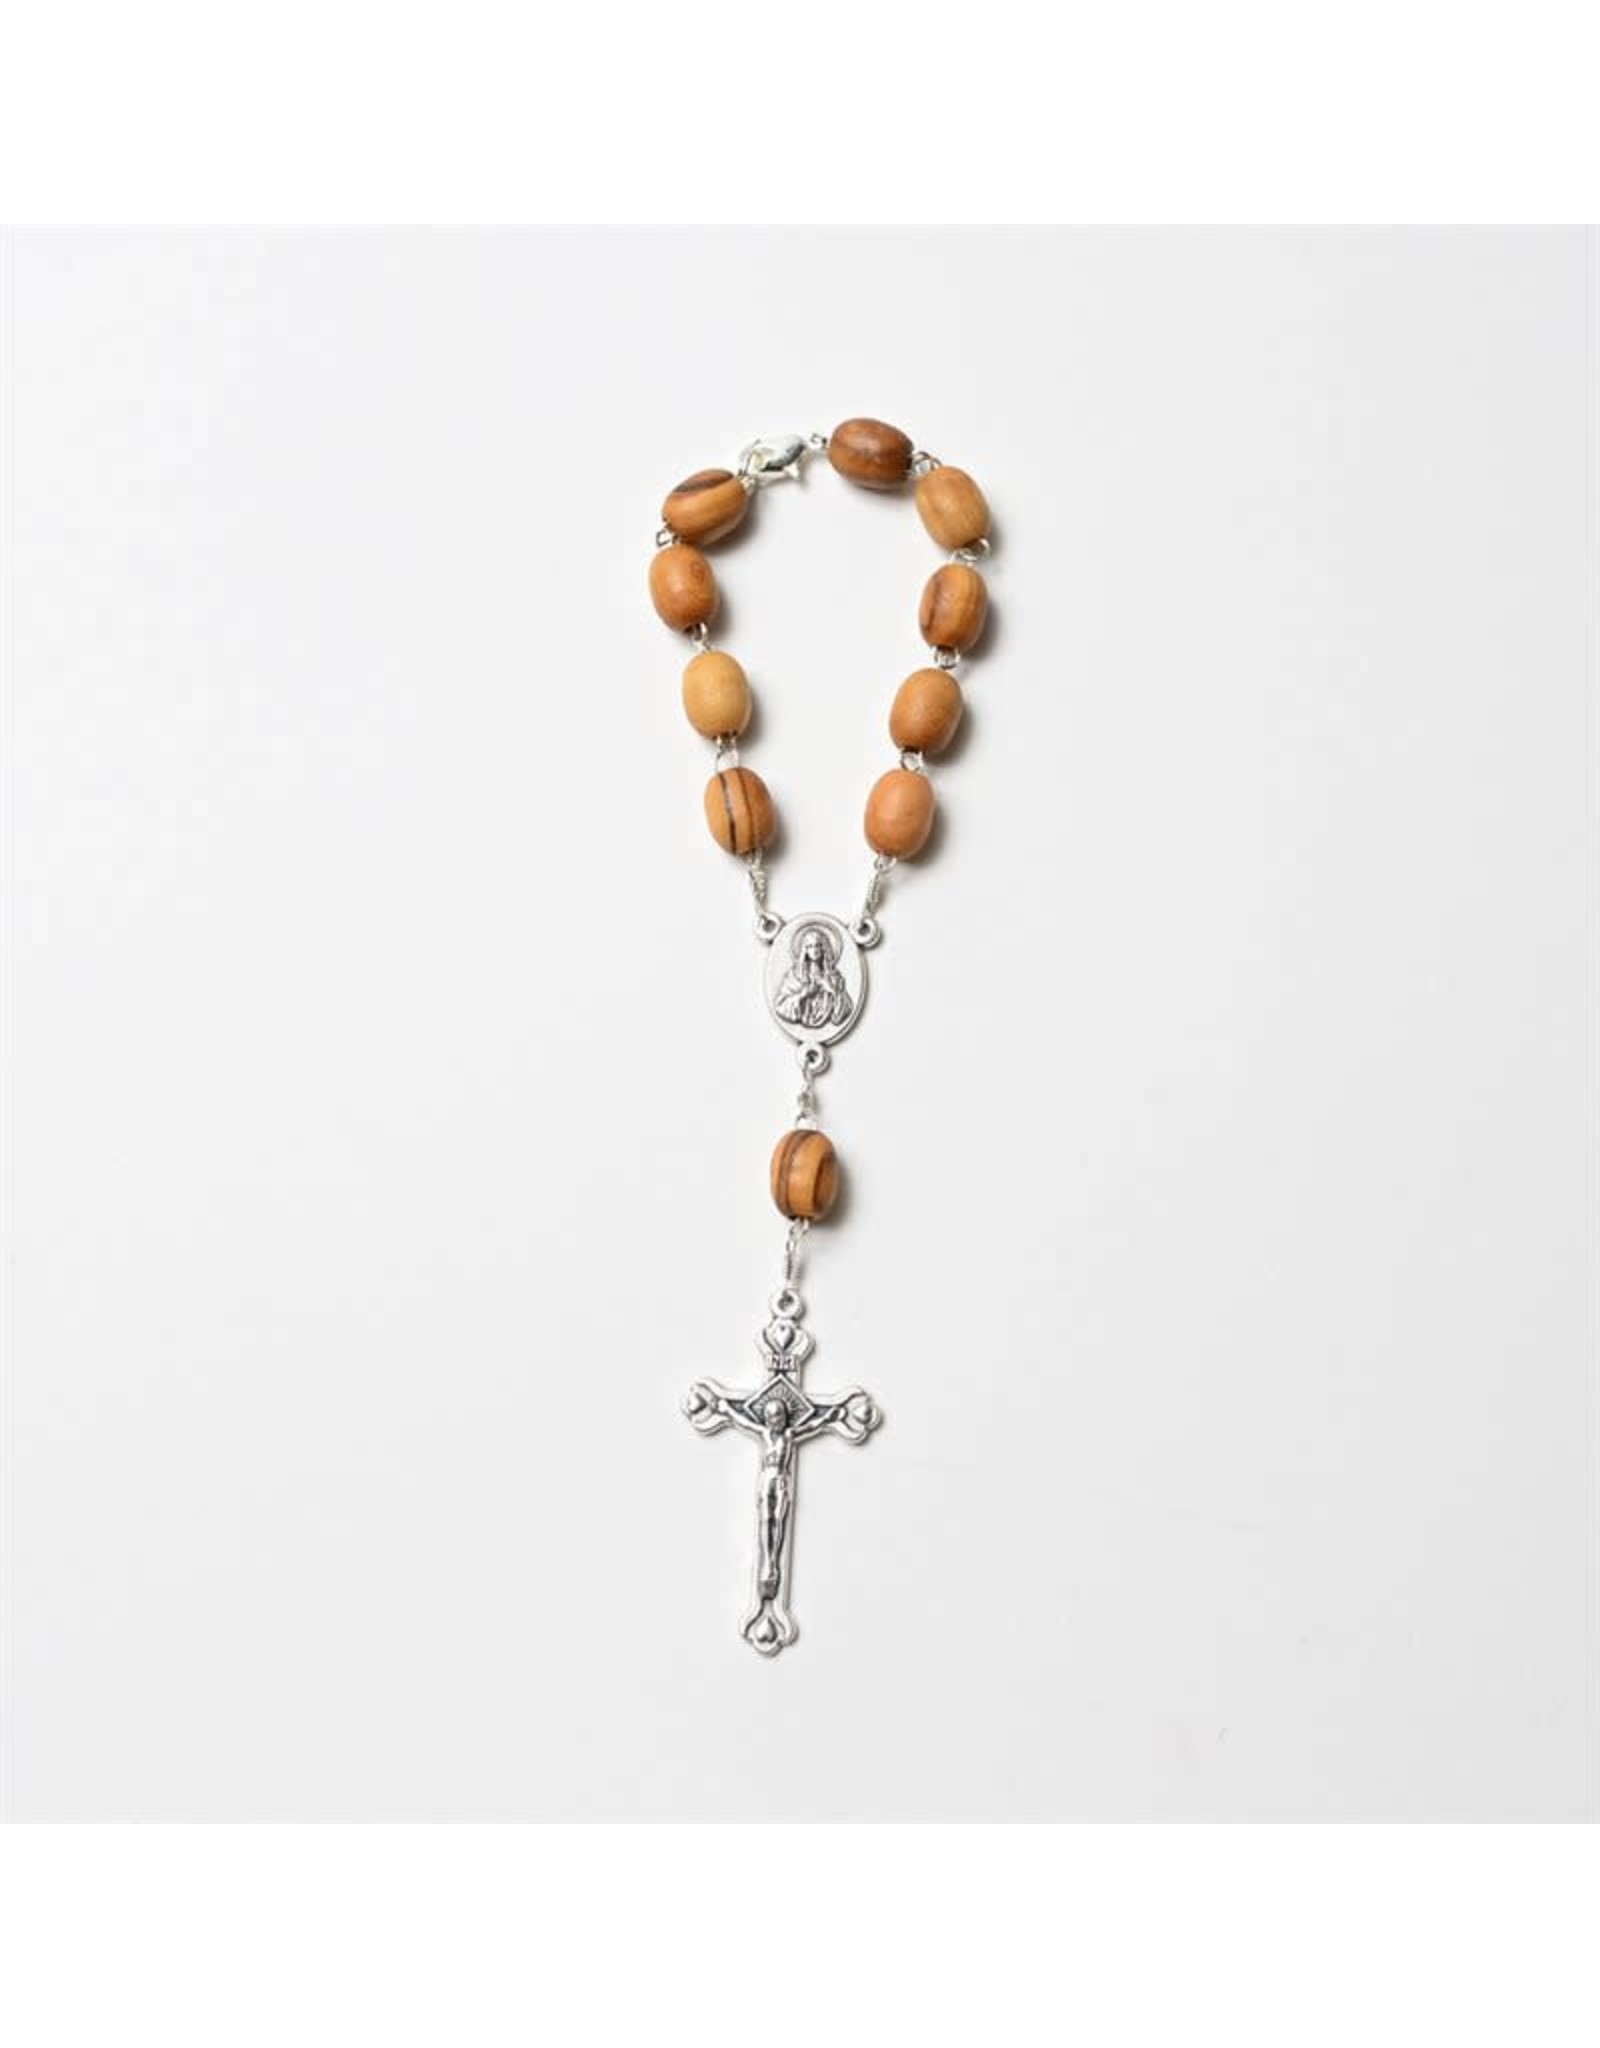 Shomali Auto Rosary - Olive Wood from the Holy Land